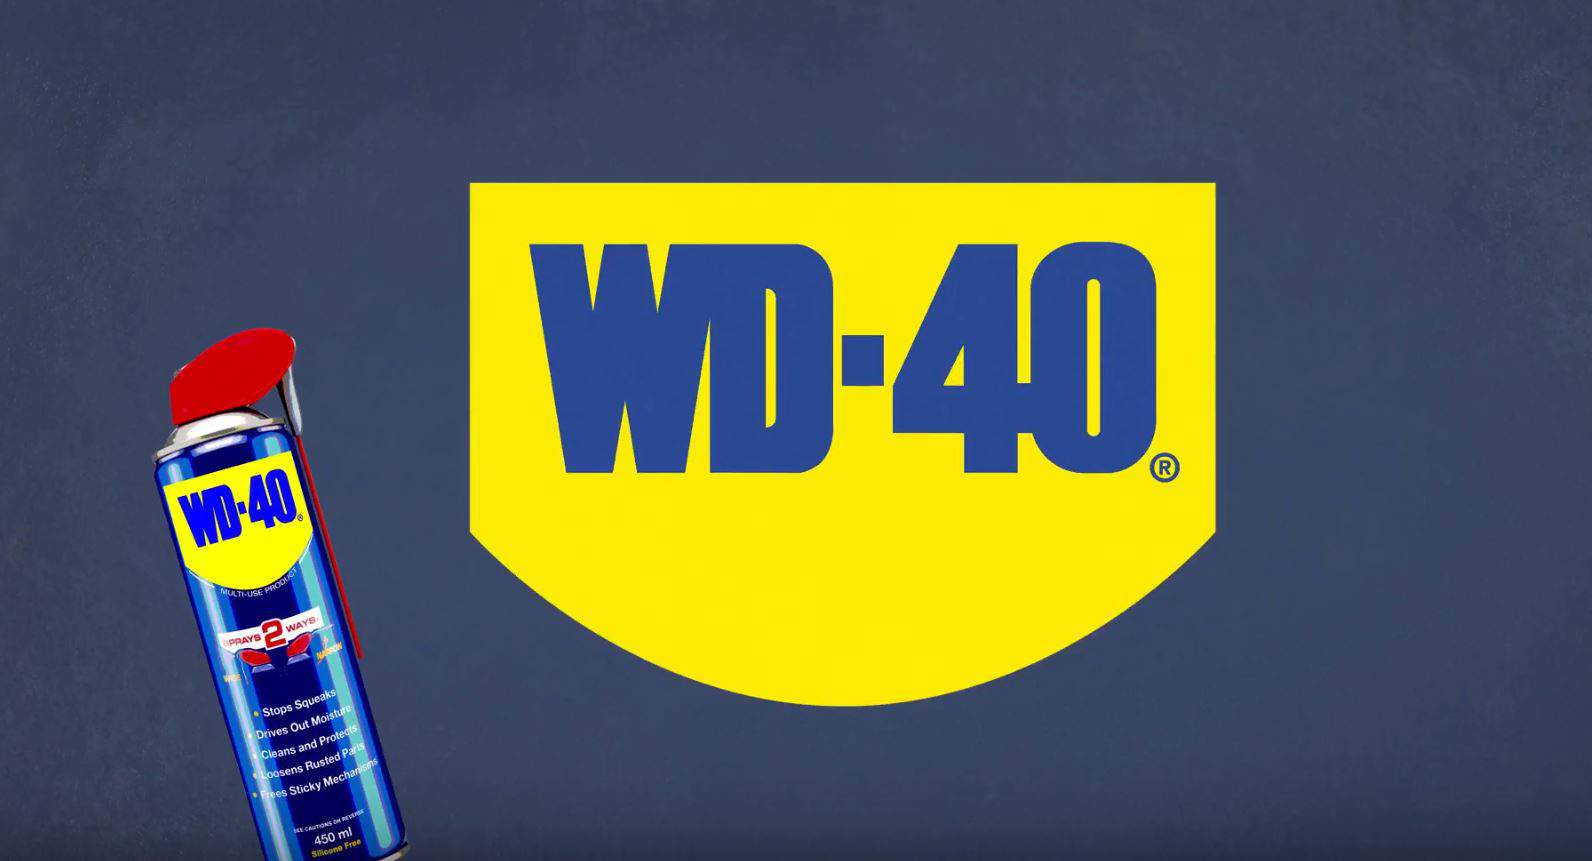 wd-40 about us thumbnail1